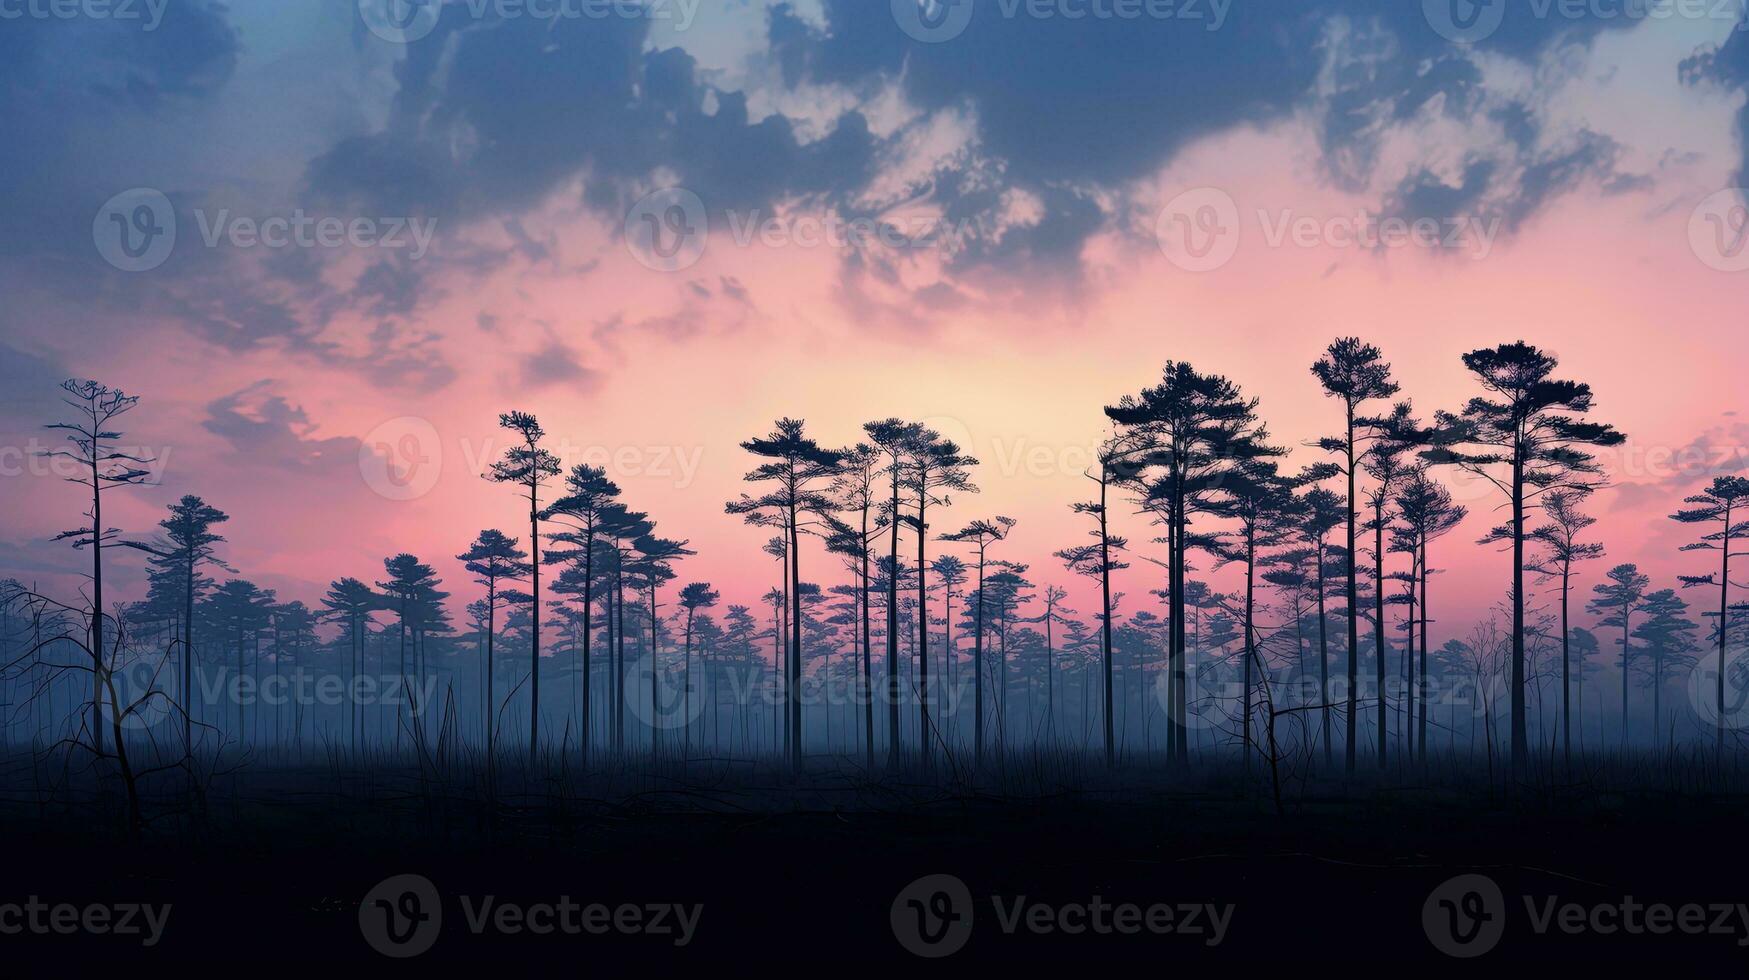 Pine trees cleared forest area against cloudy sky at dusk. silhouette concept photo